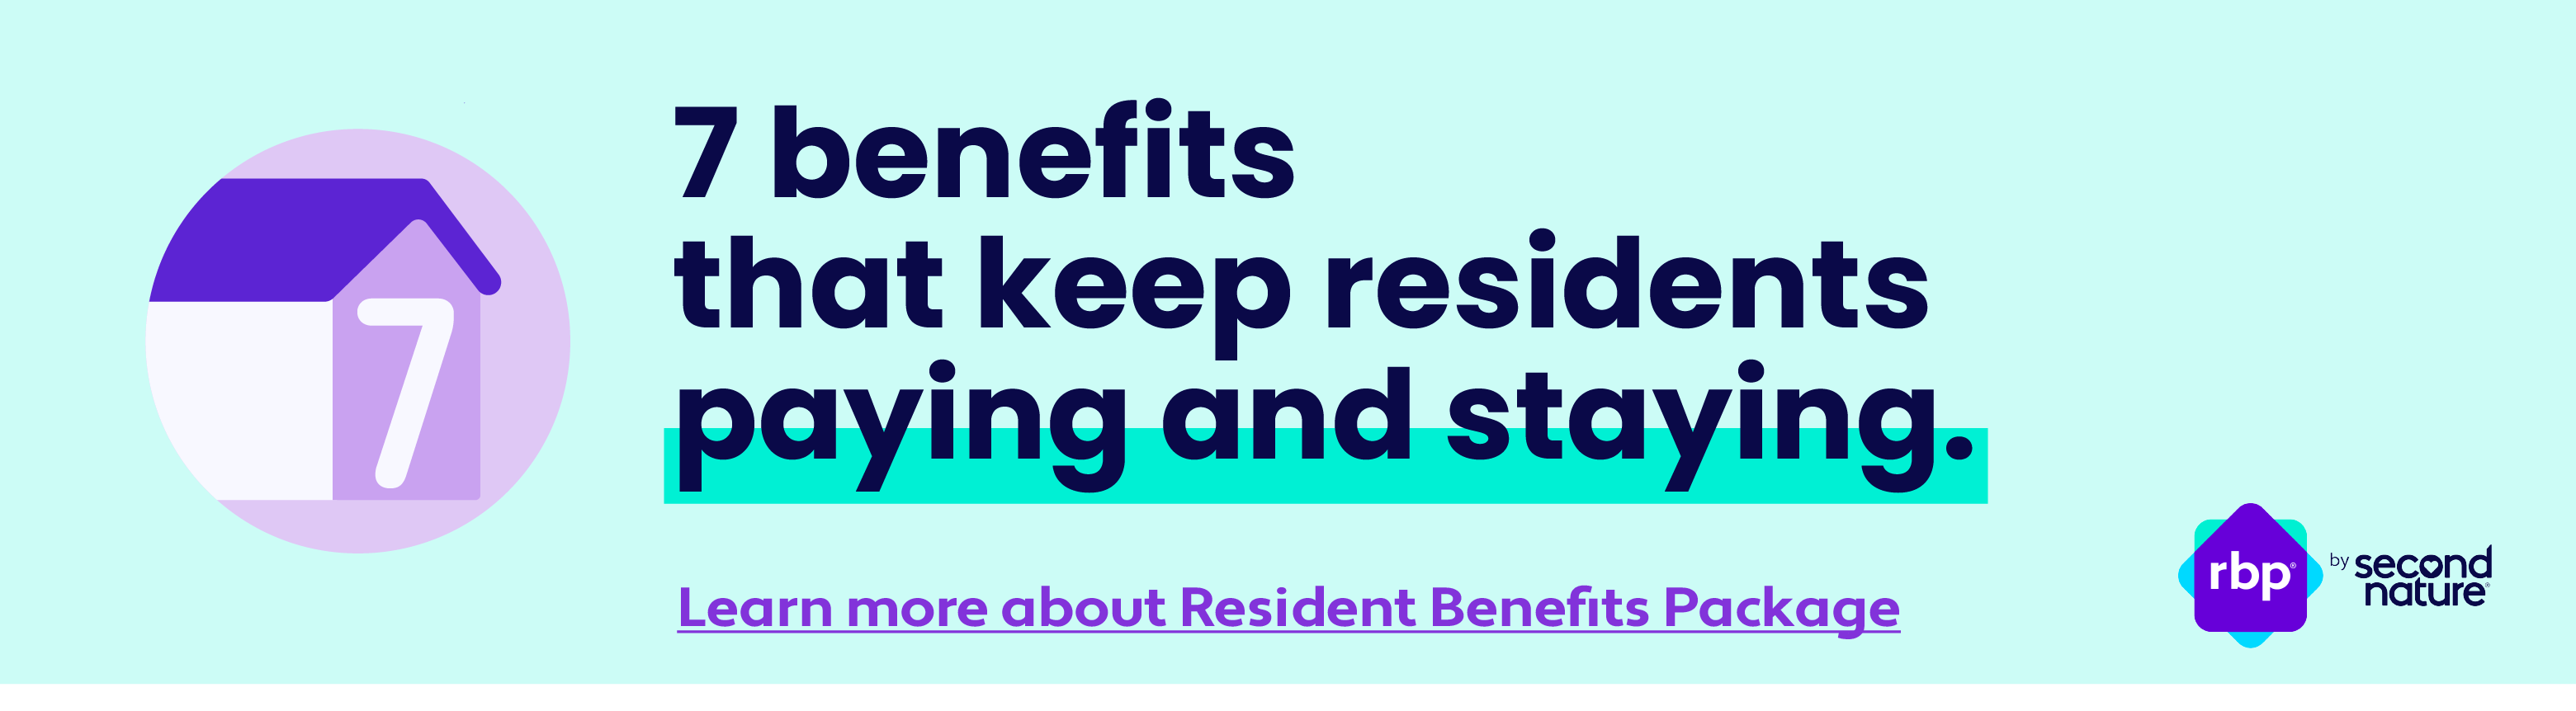 7 benefits that keep residents paying and staying